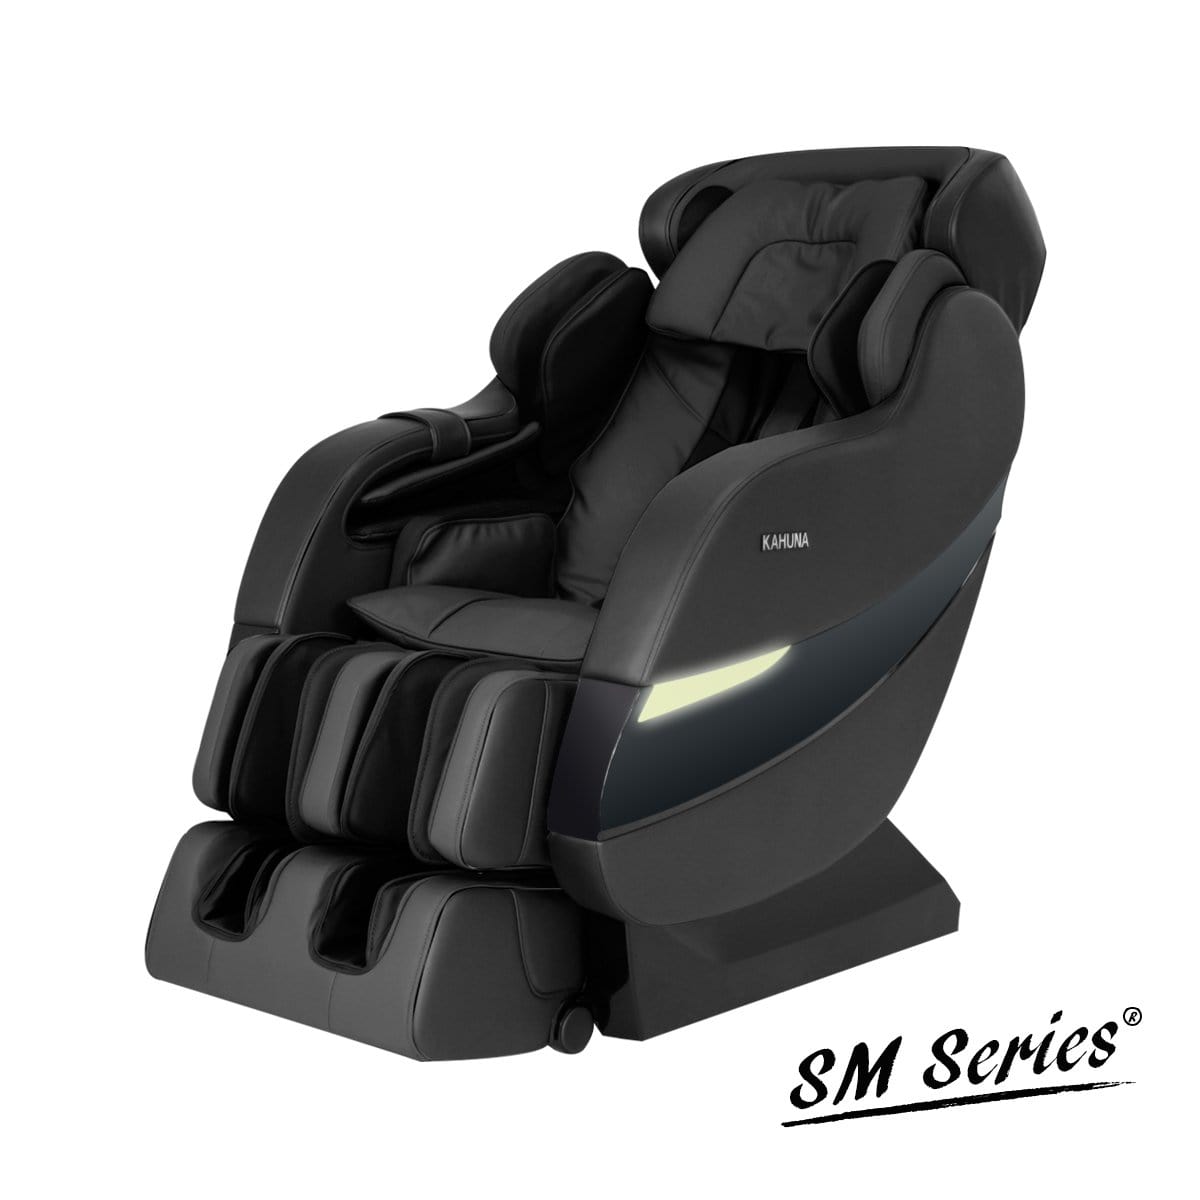 Ace Massage Chairs Black KAHUNA CHAIR - SM 7300S SM7300S